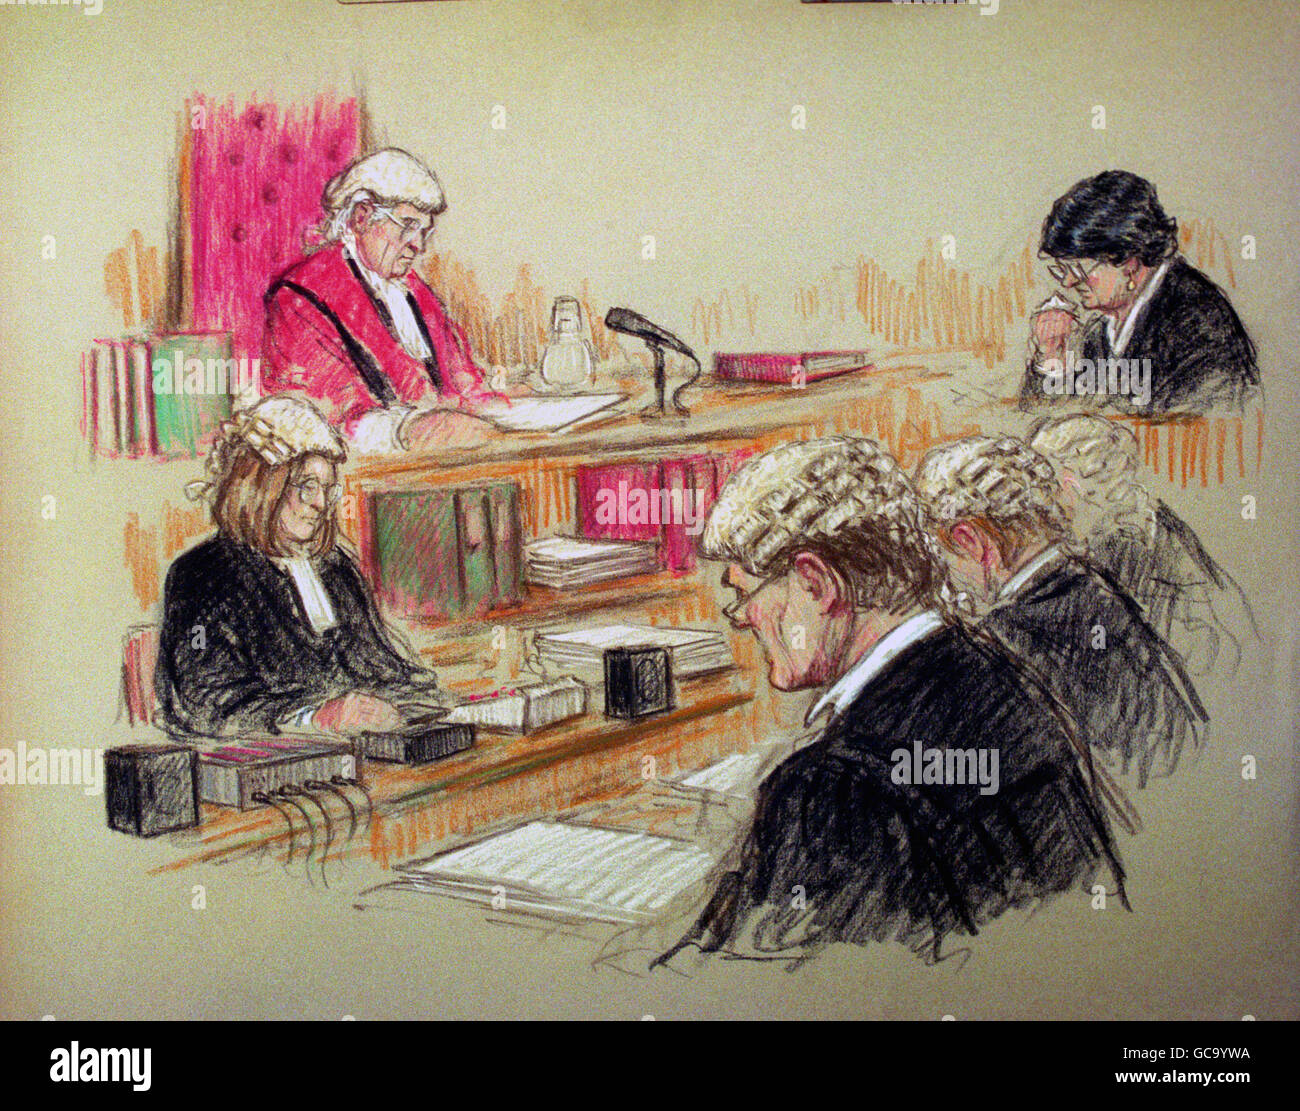 AN ARTIST'S IMPRESSION OF THE COURTROOM IN THE ROSEMARY WEST TRIAL AS TAPE RECORDINGS OF FRED WEST ARE PLAYED. Stock Photo